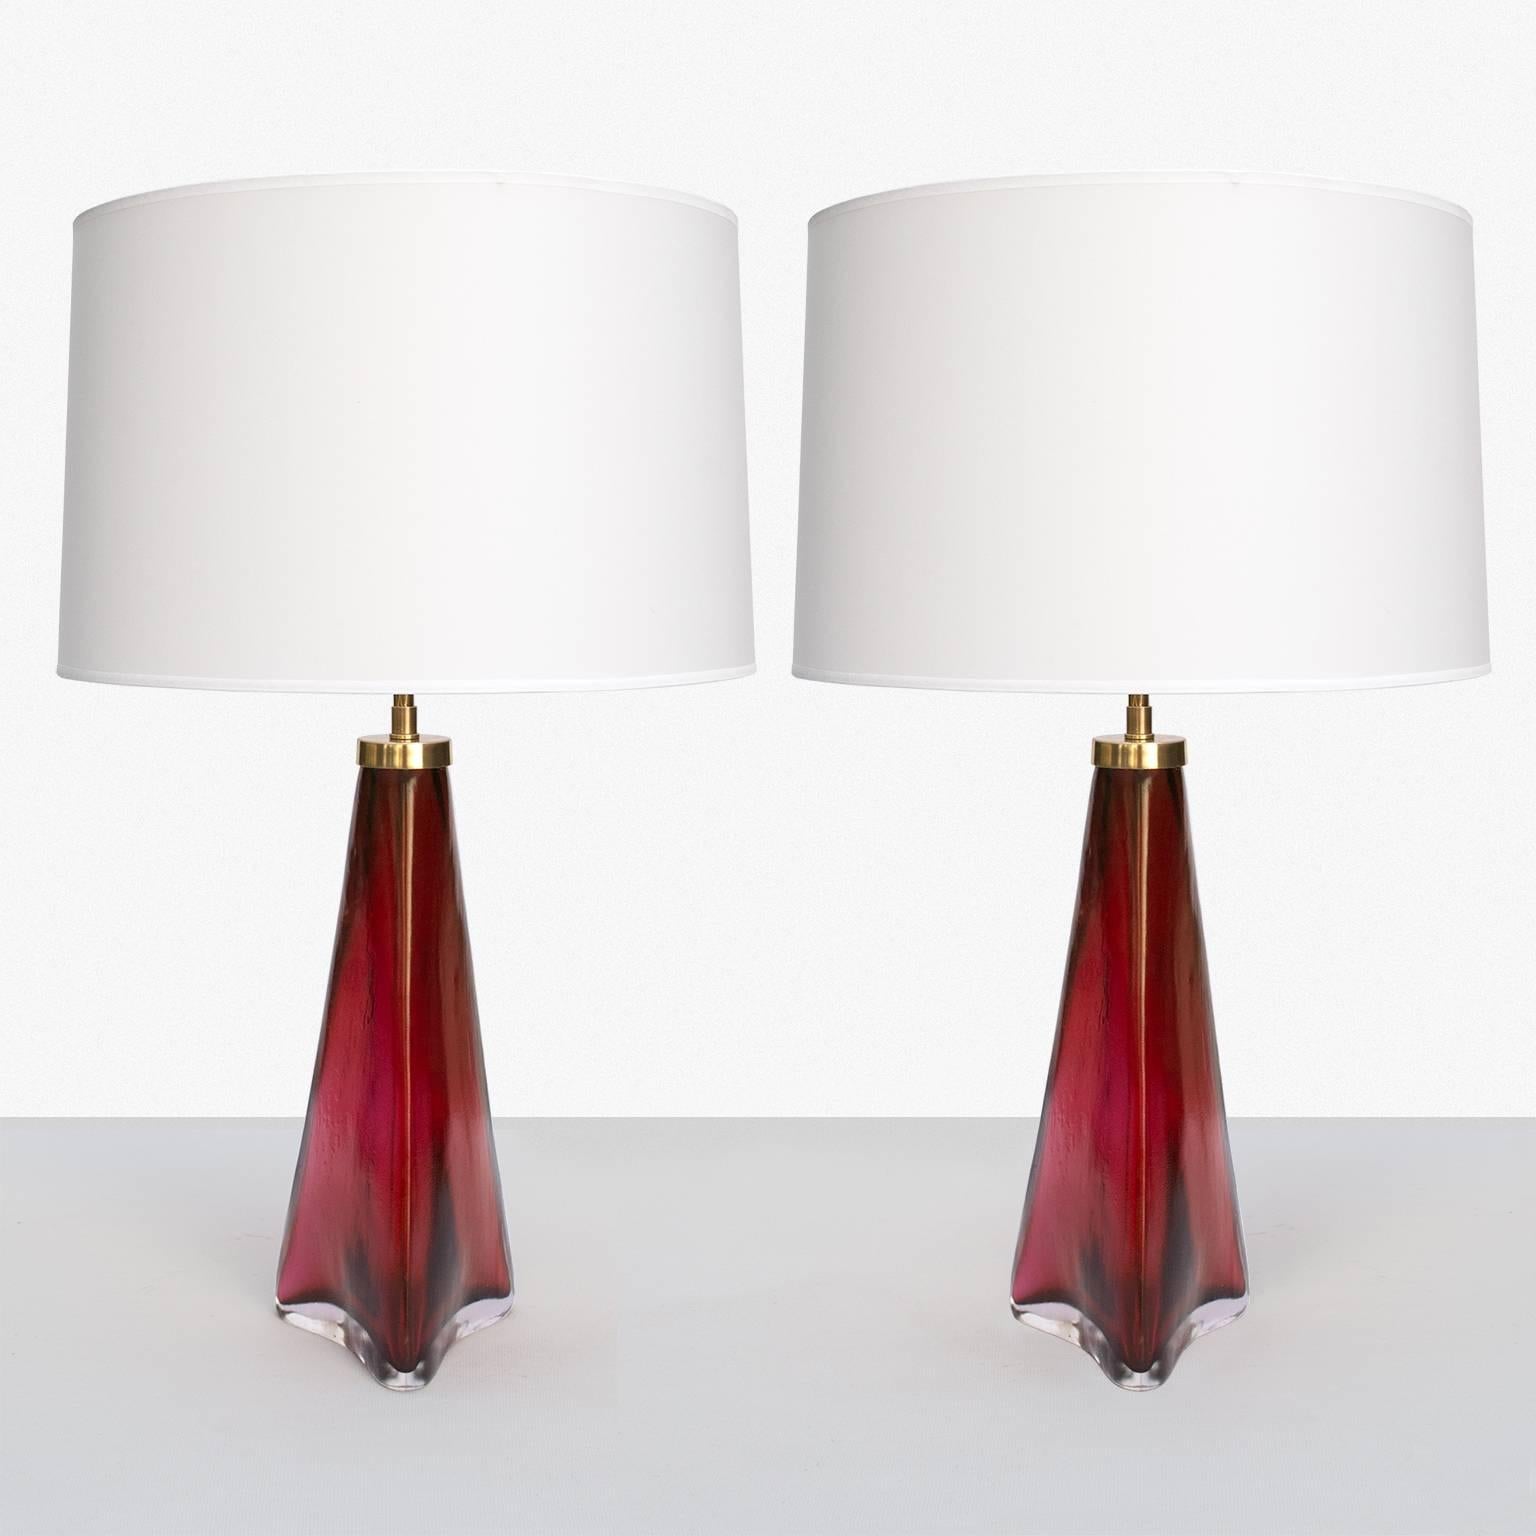 Gorgeous pair of Swedish table lamps in red and clear glass with matt, acid treated finish. Signed Orrefors on the brass cap, lamps retains original paper label. Wired for the US with new high-end double cluster socket hardware of polished lacquered